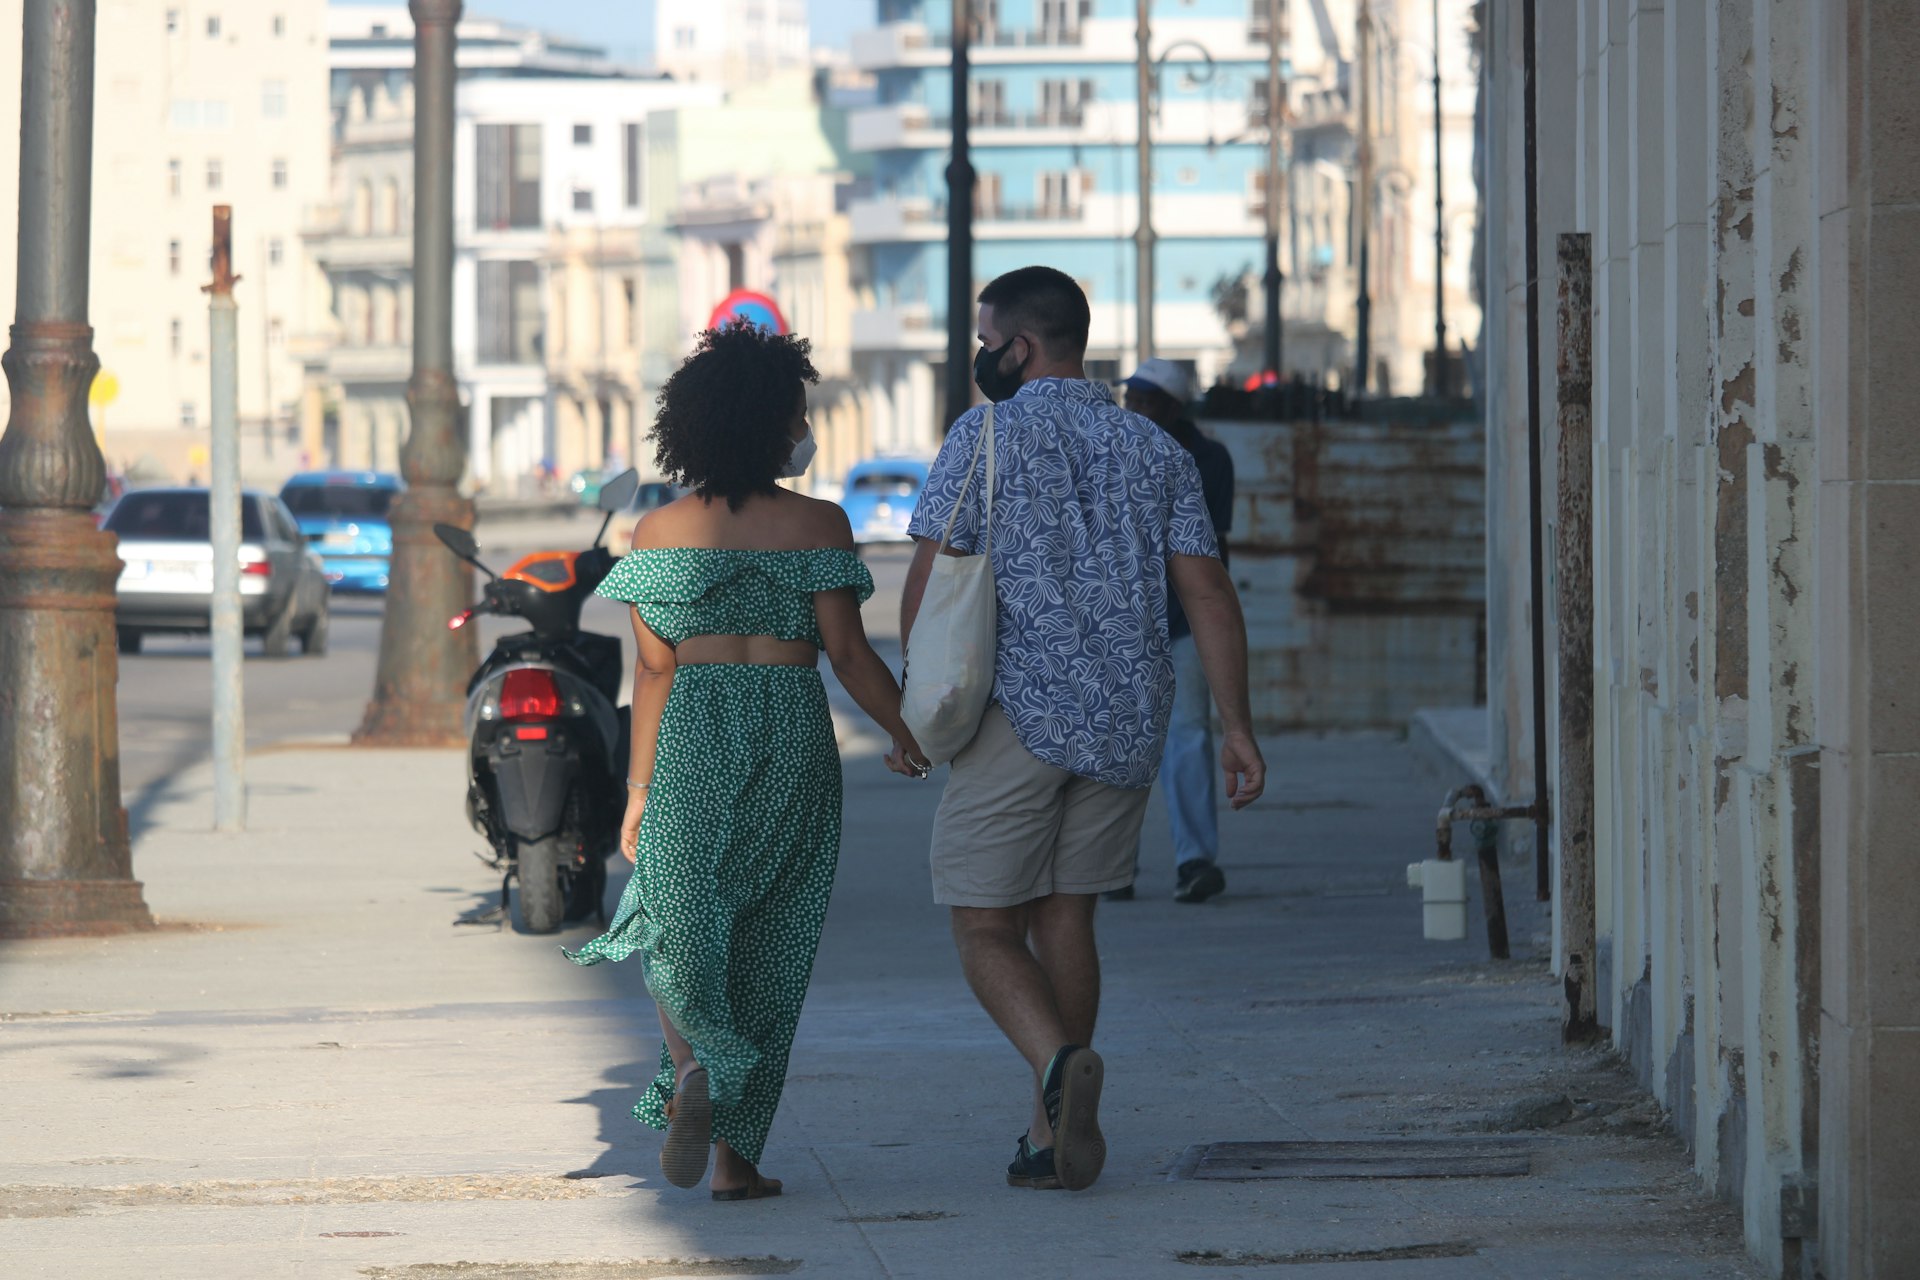 A couple adheres to the mask mandates on the streets of Havana